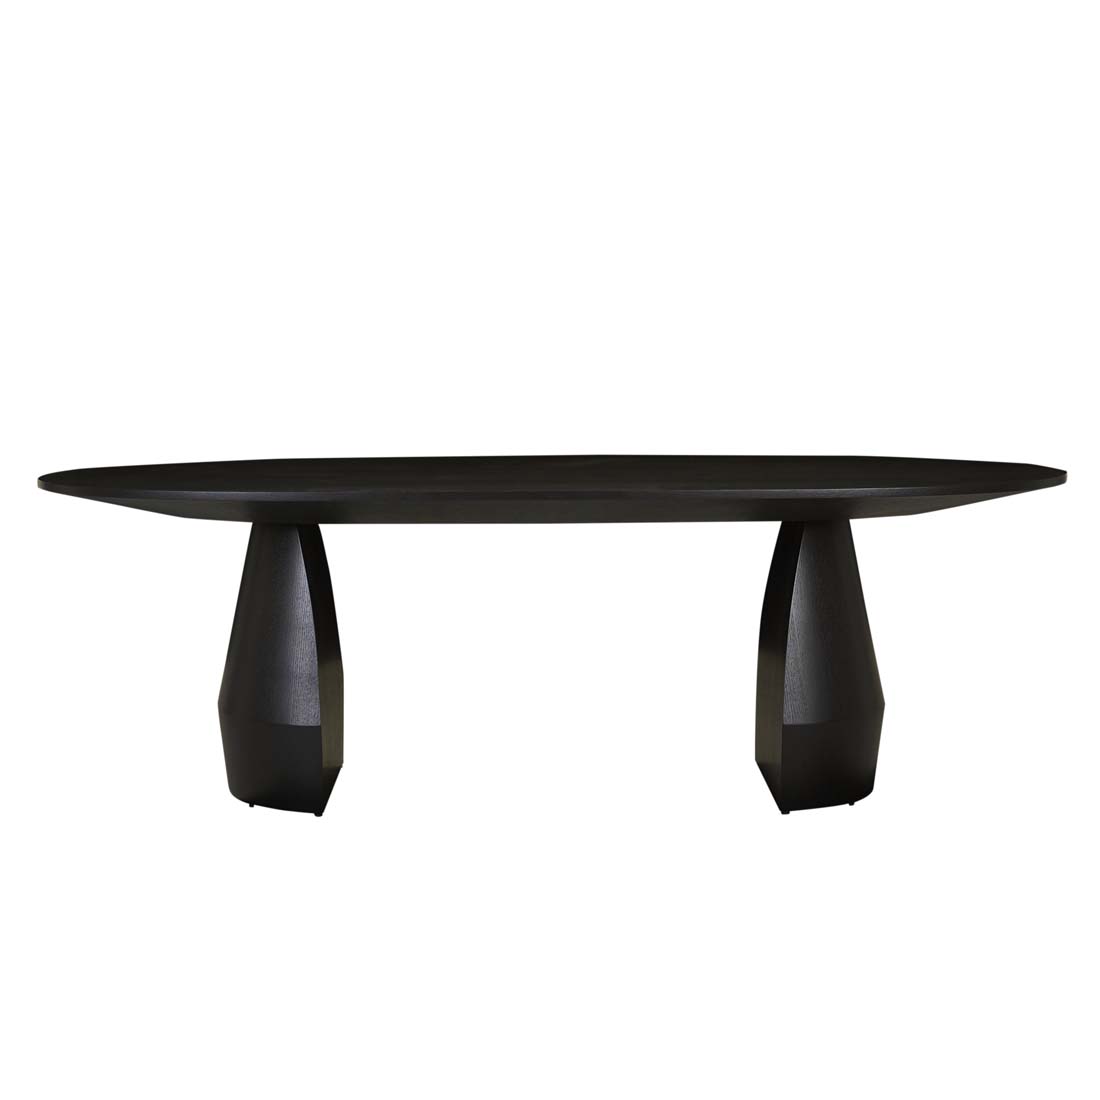 Bloom Oval Dining Table image 14